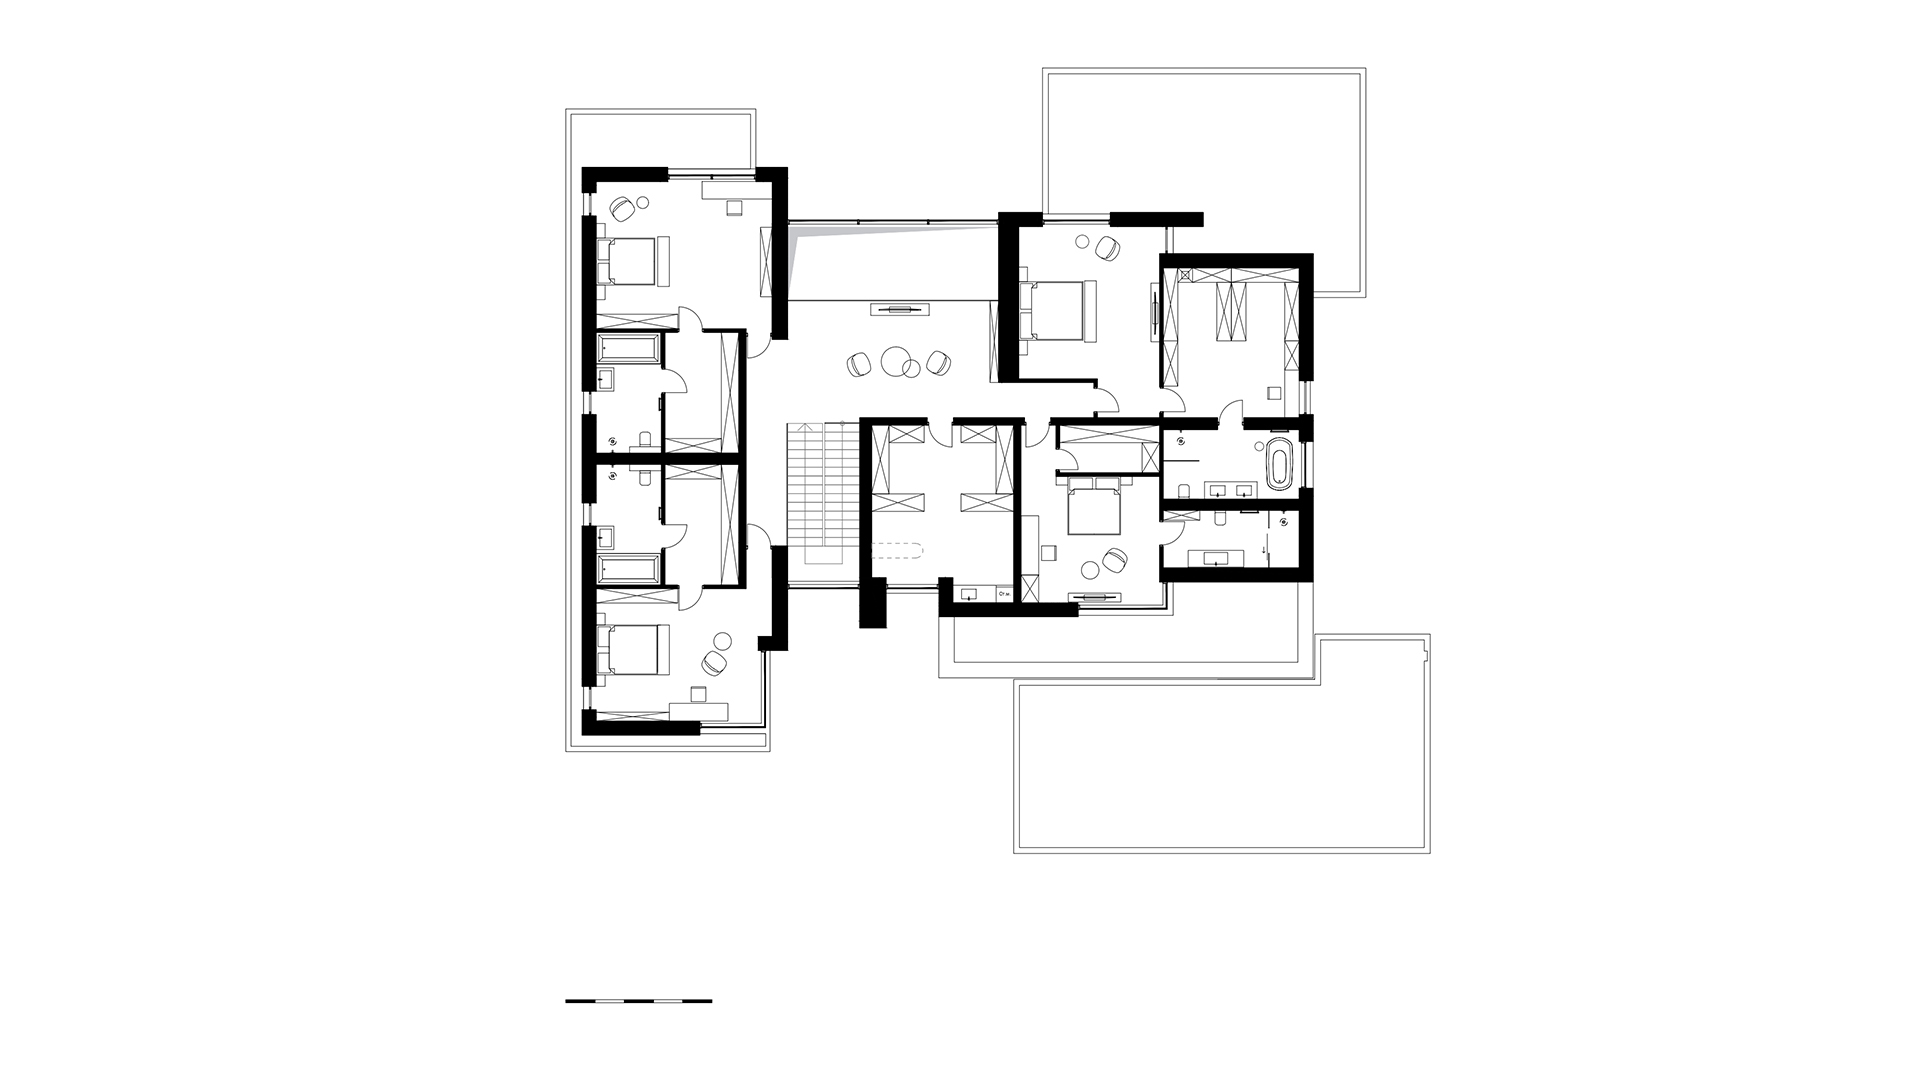 Layout of a private house